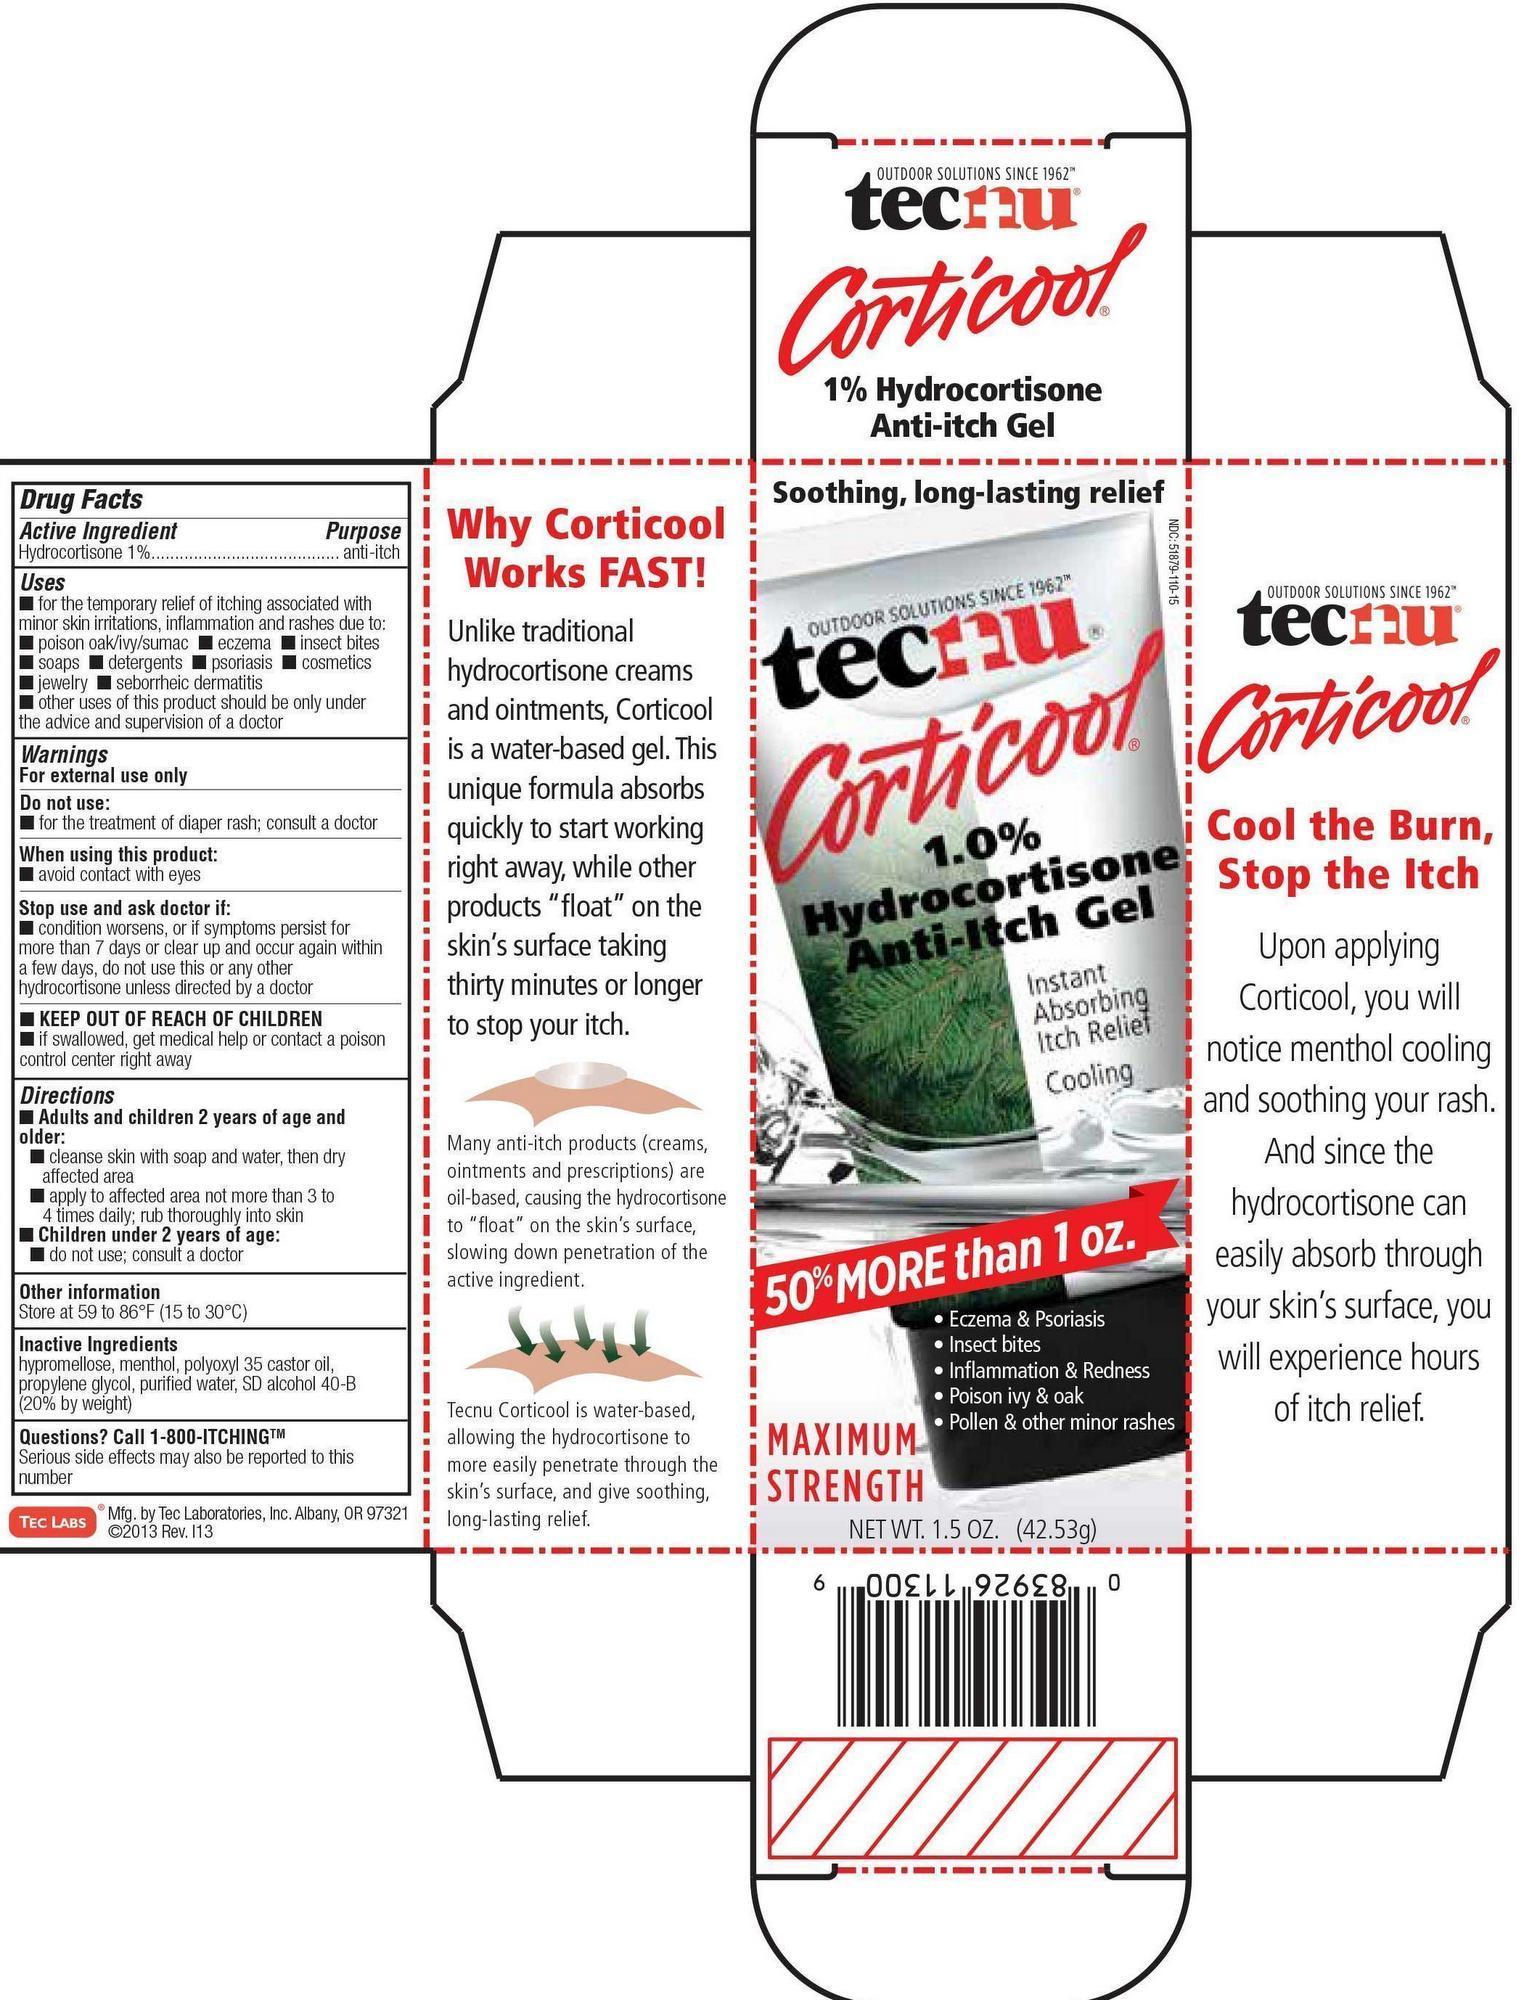 Corticool tube point of purchase carton